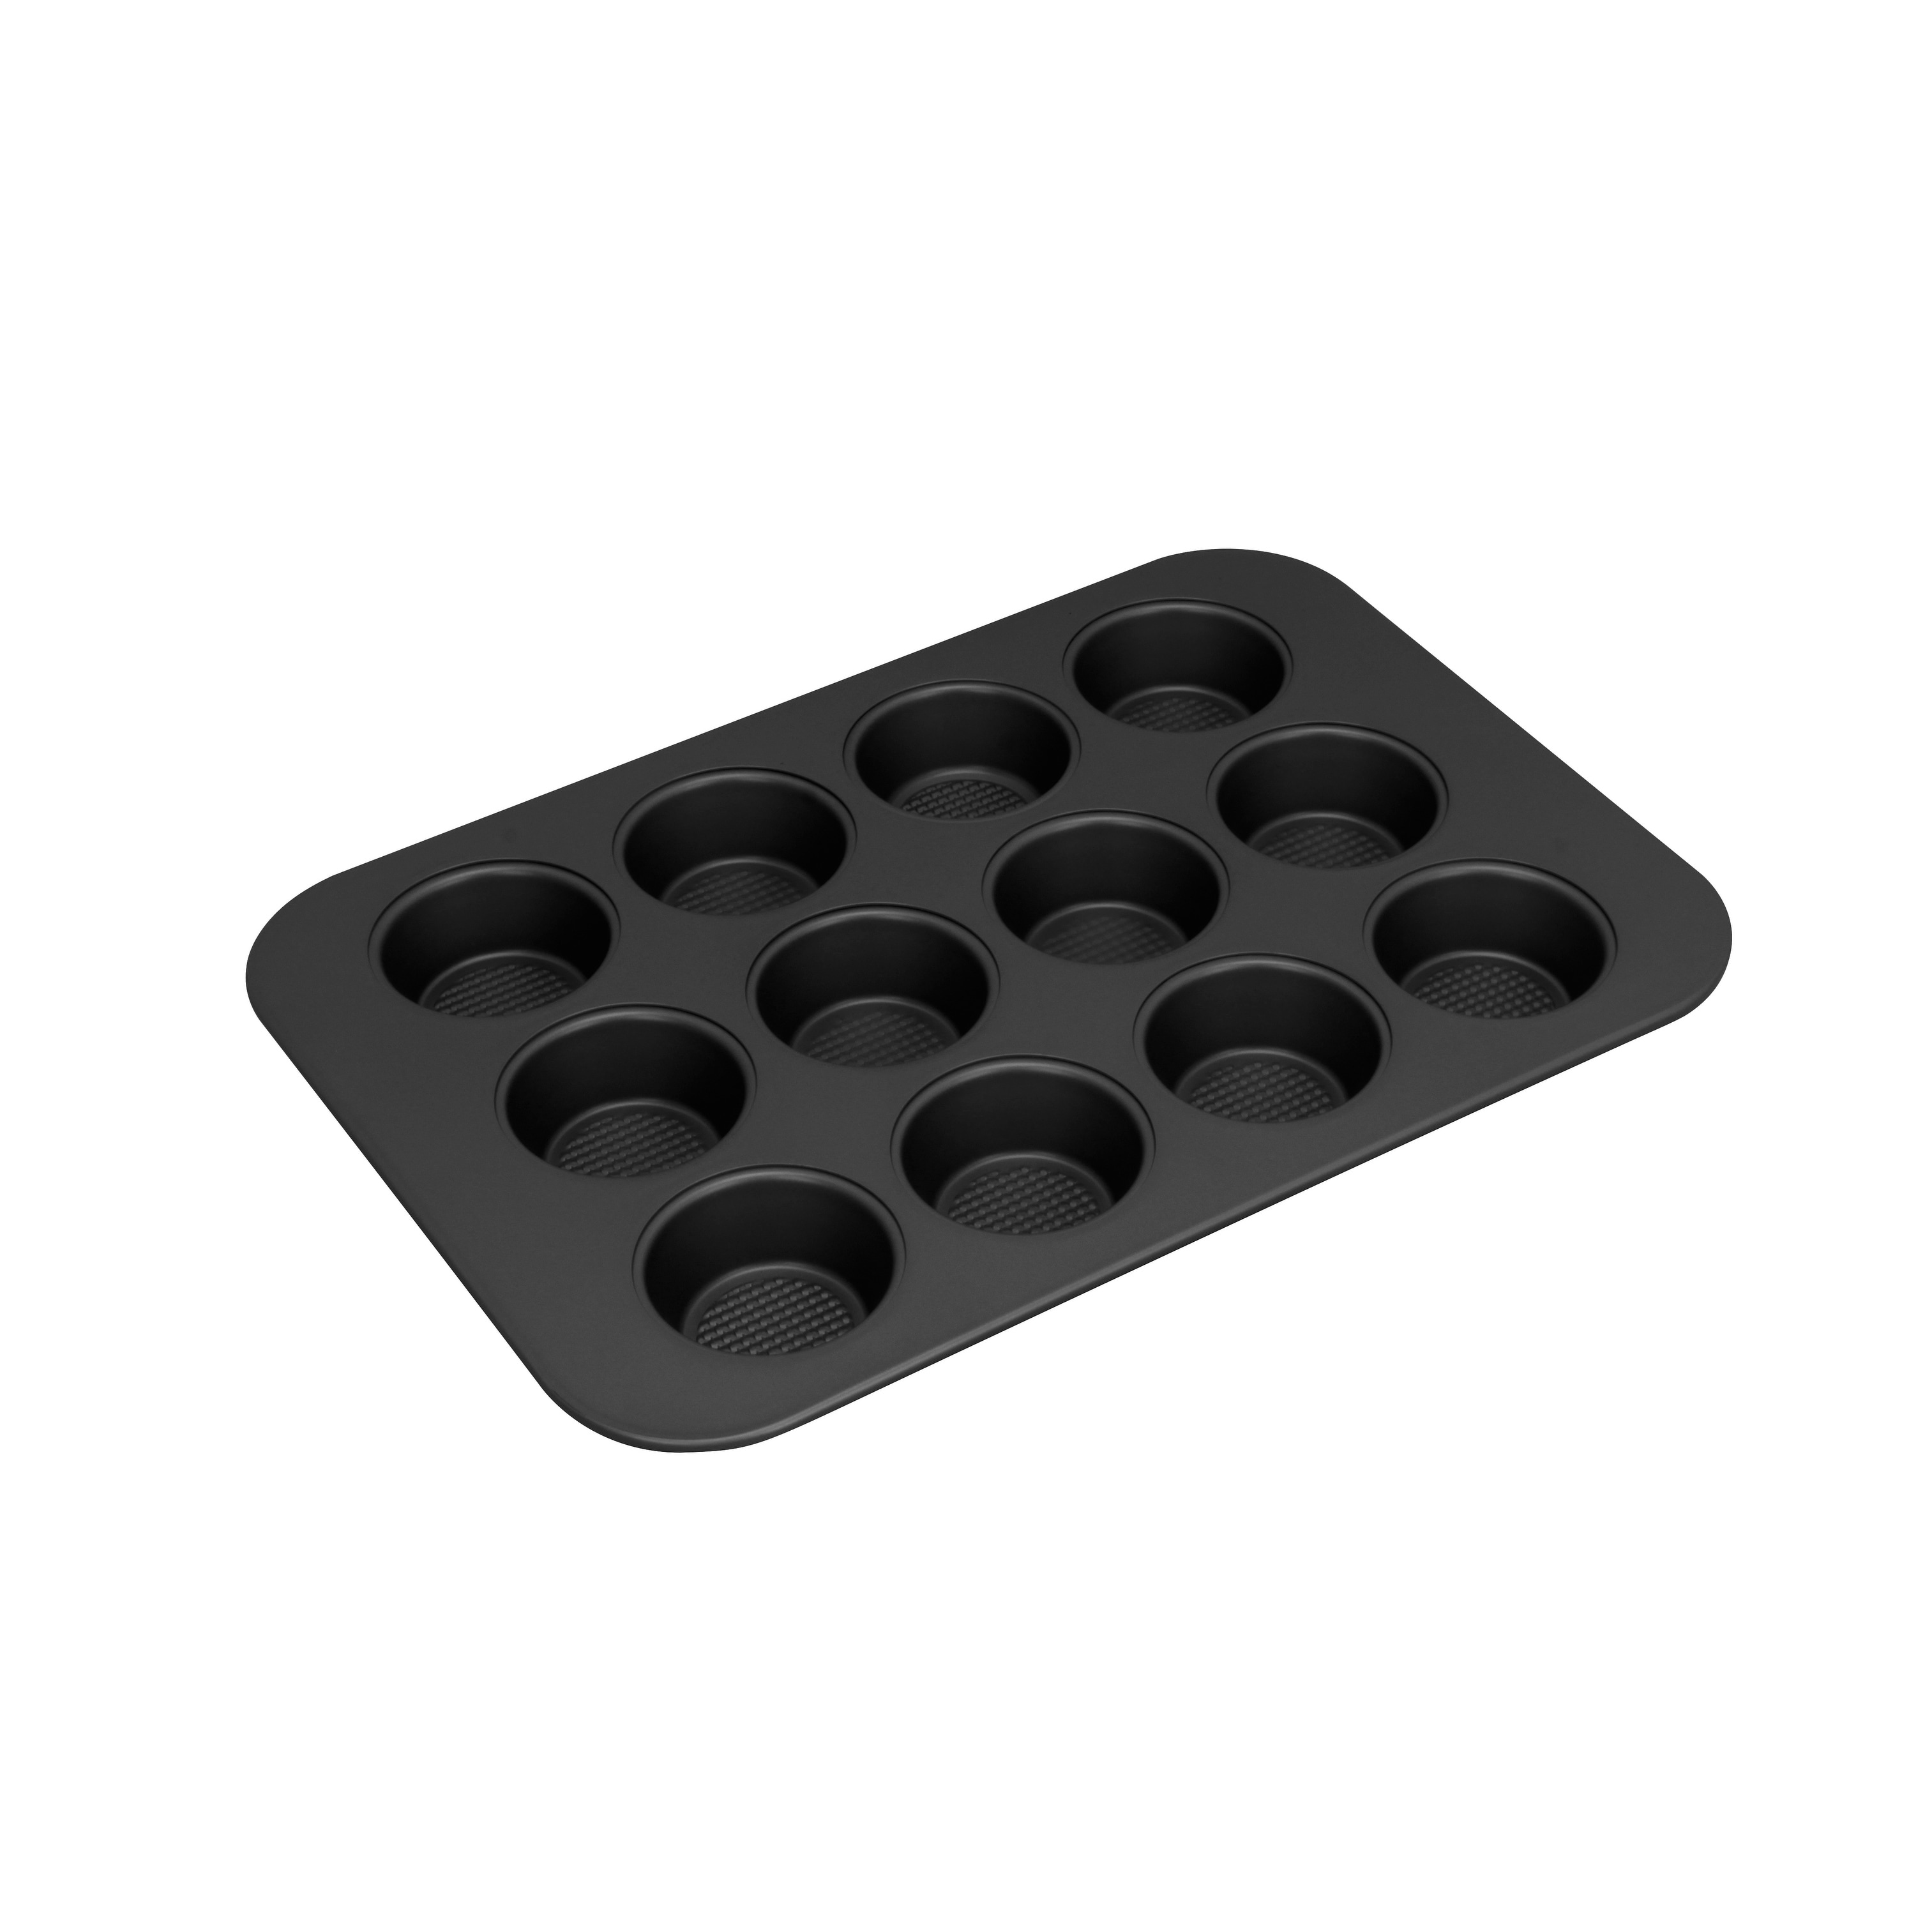 Mrs. Anderson Mini Muffin Silicone Pan 24 Cup